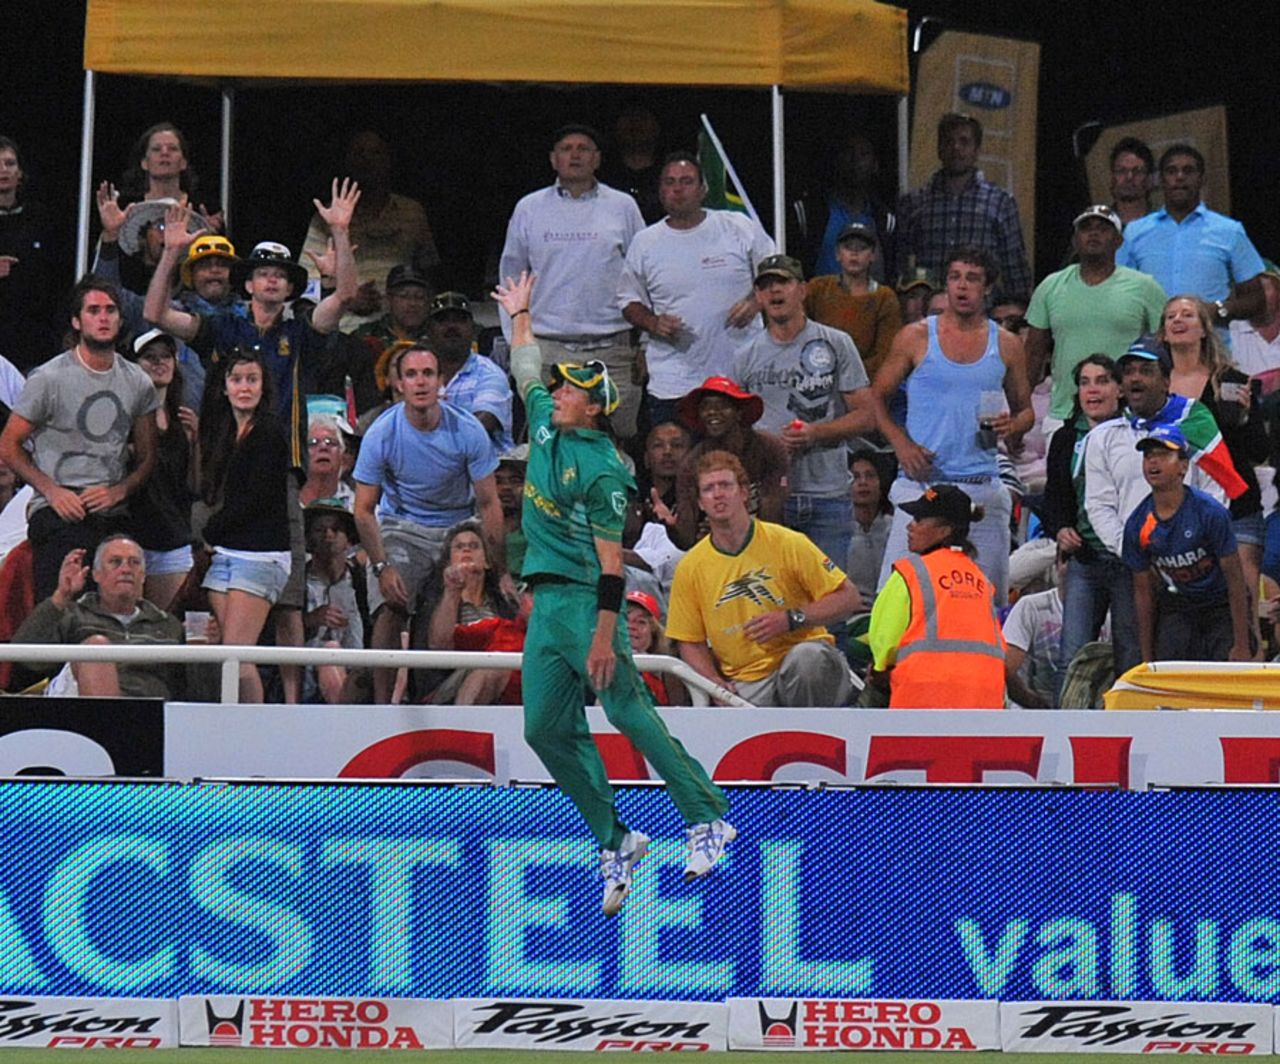 Dale Steyn jumps in vain as Yusuf Pathan's shot sails into the crowd for six, South Africa v India, 3rd ODI, Cape Town, January 18, 2011